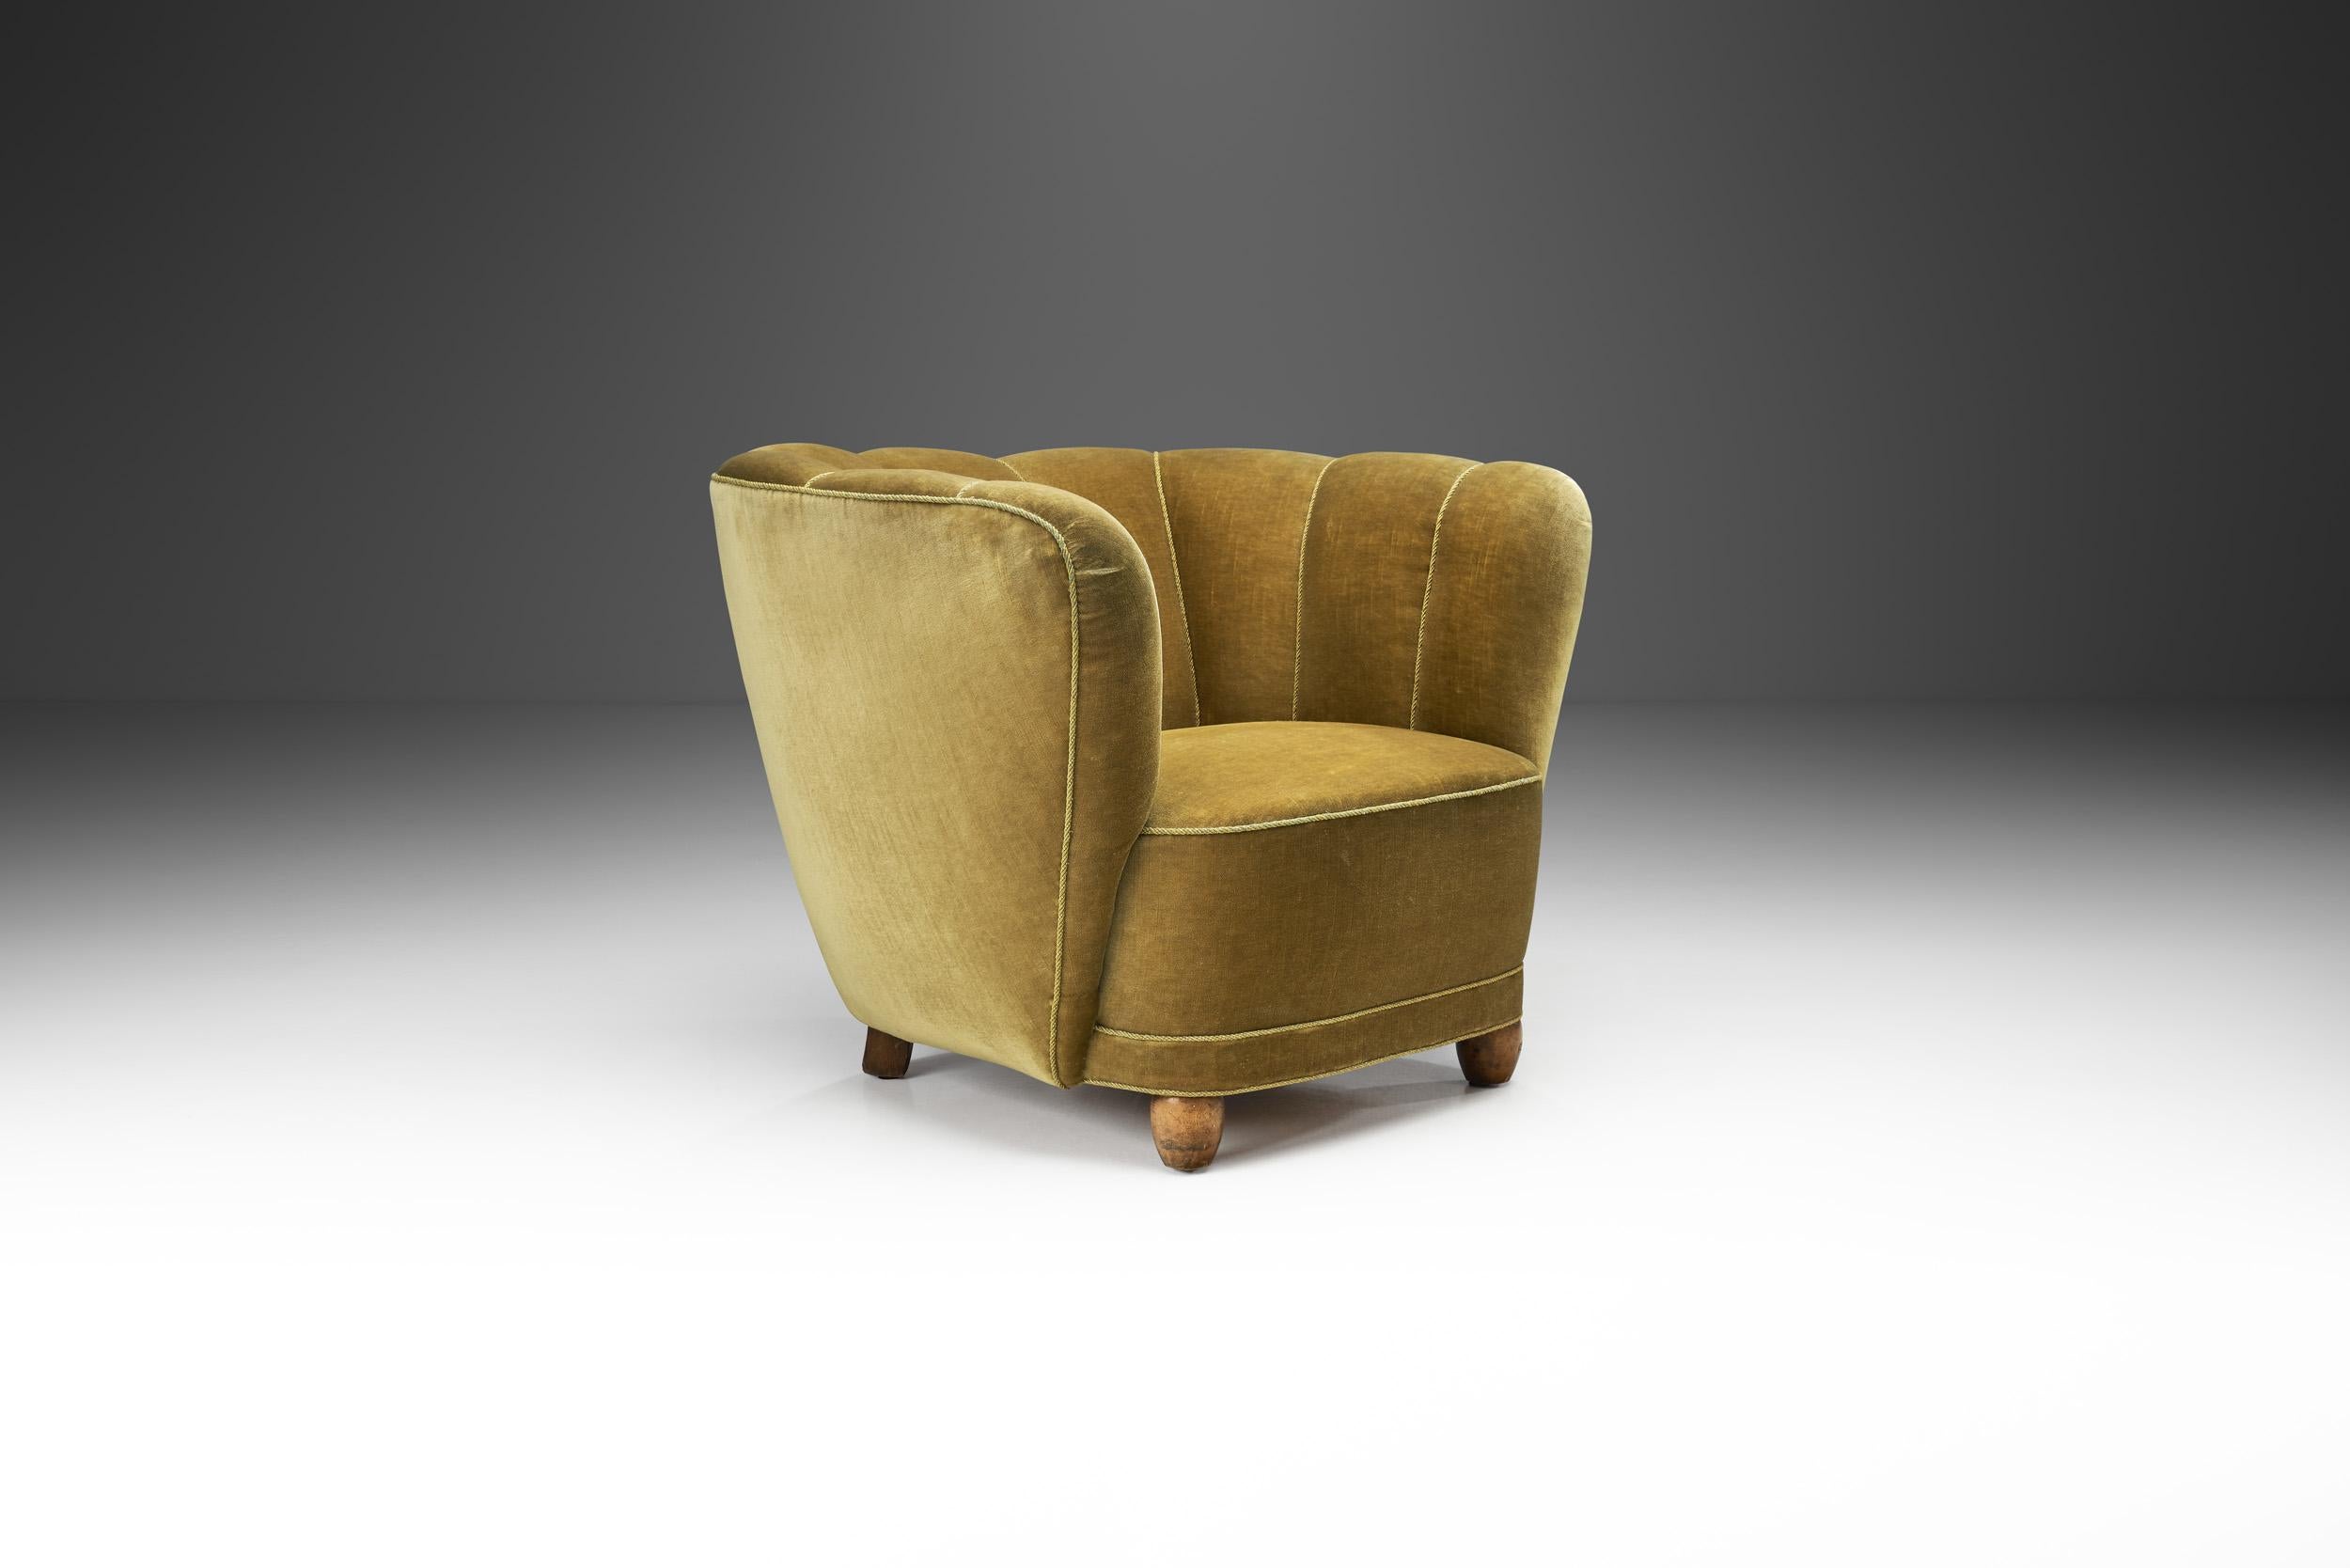 Mid-20th Century Danish Cabinetmaker Lounge Chair with Velour Upholstery, Denmark, 1940s For Sale